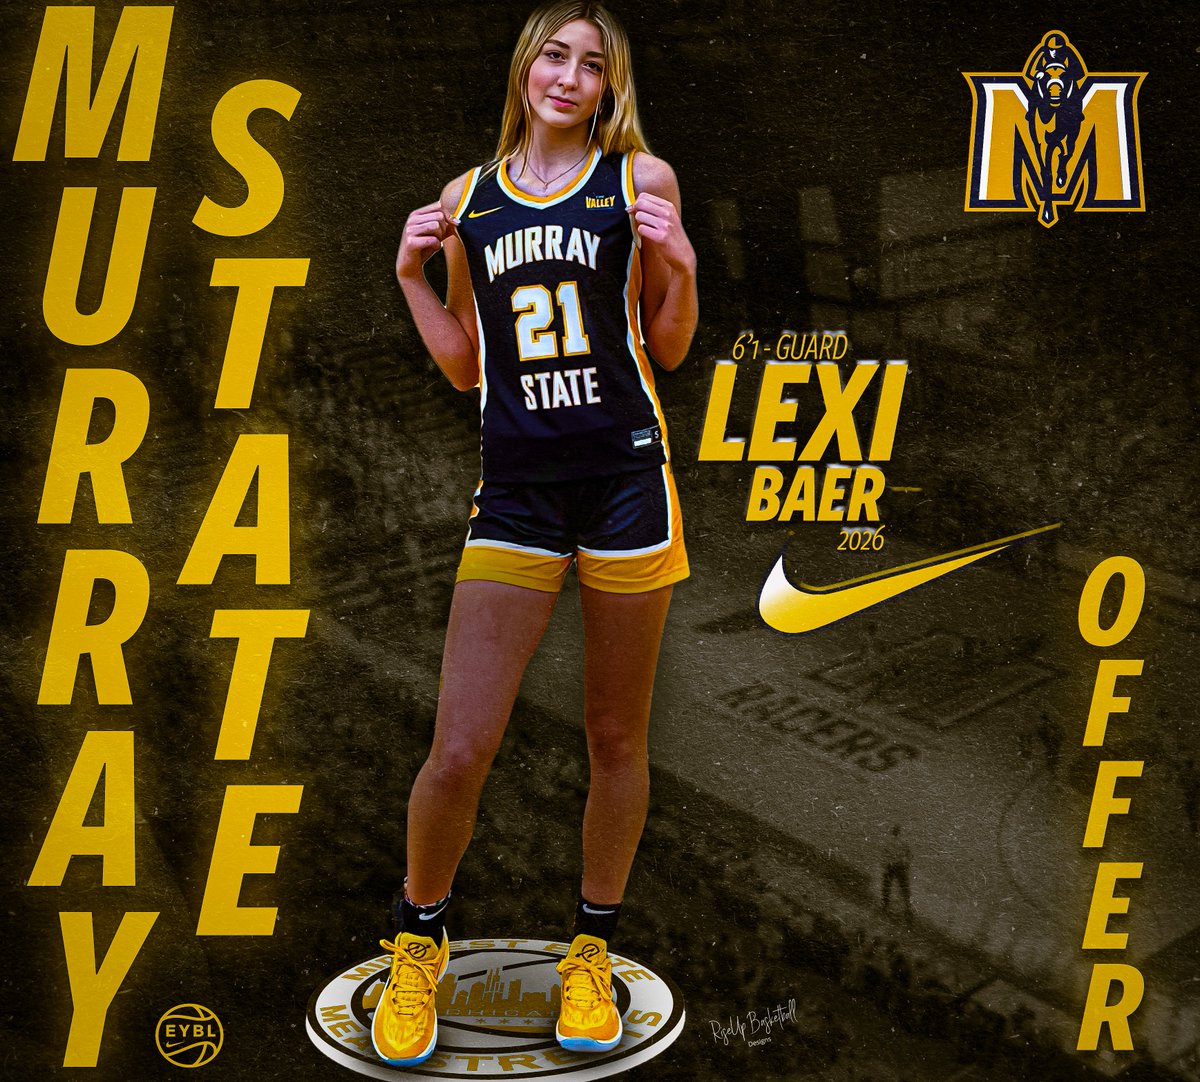 Congratulations to Lexi Baer (@LexiBaer15) on the scholarship offer she received from Murray State University WBB (@RacersWBB) and Coach Turner (@racersWBBcoach). #MidwestStreetsEYBL #EliteStreetsEYBL #MidwestMeanElite #EliteMeanStreets #StreetsOfMidwestEYBL #EYBLNewEra